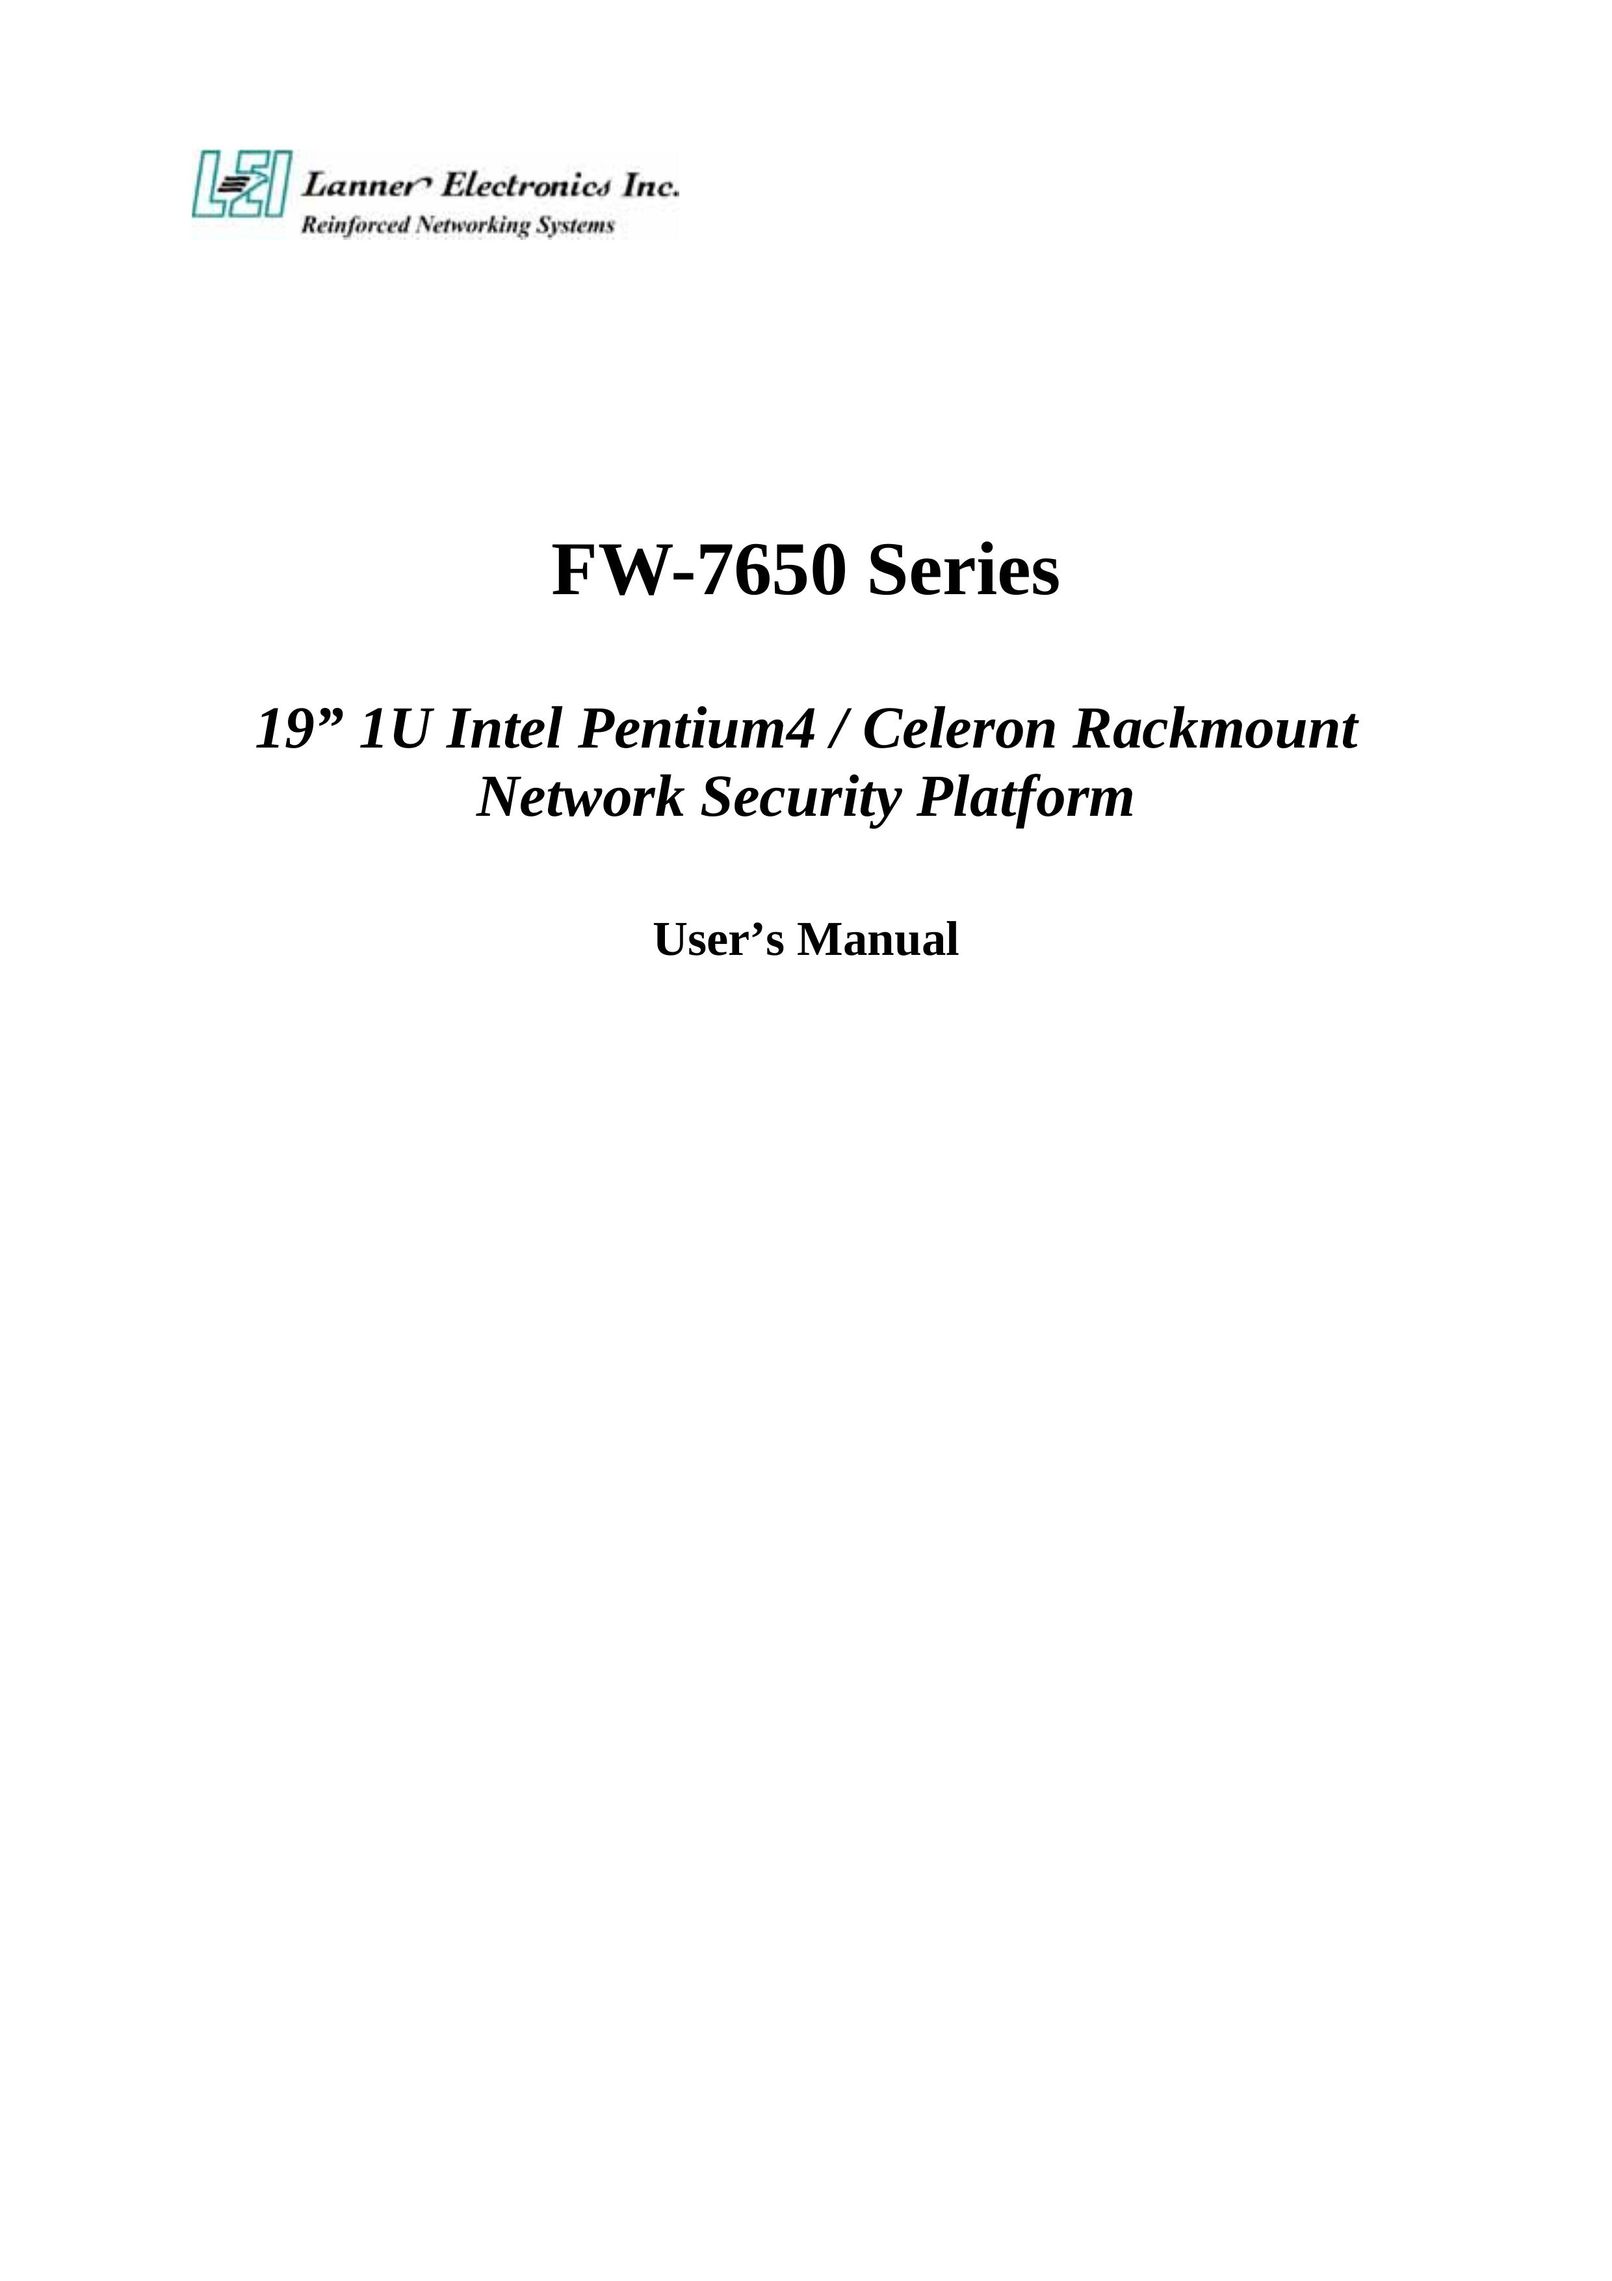 Lanner electronic FW-7650 Network Card User Manual